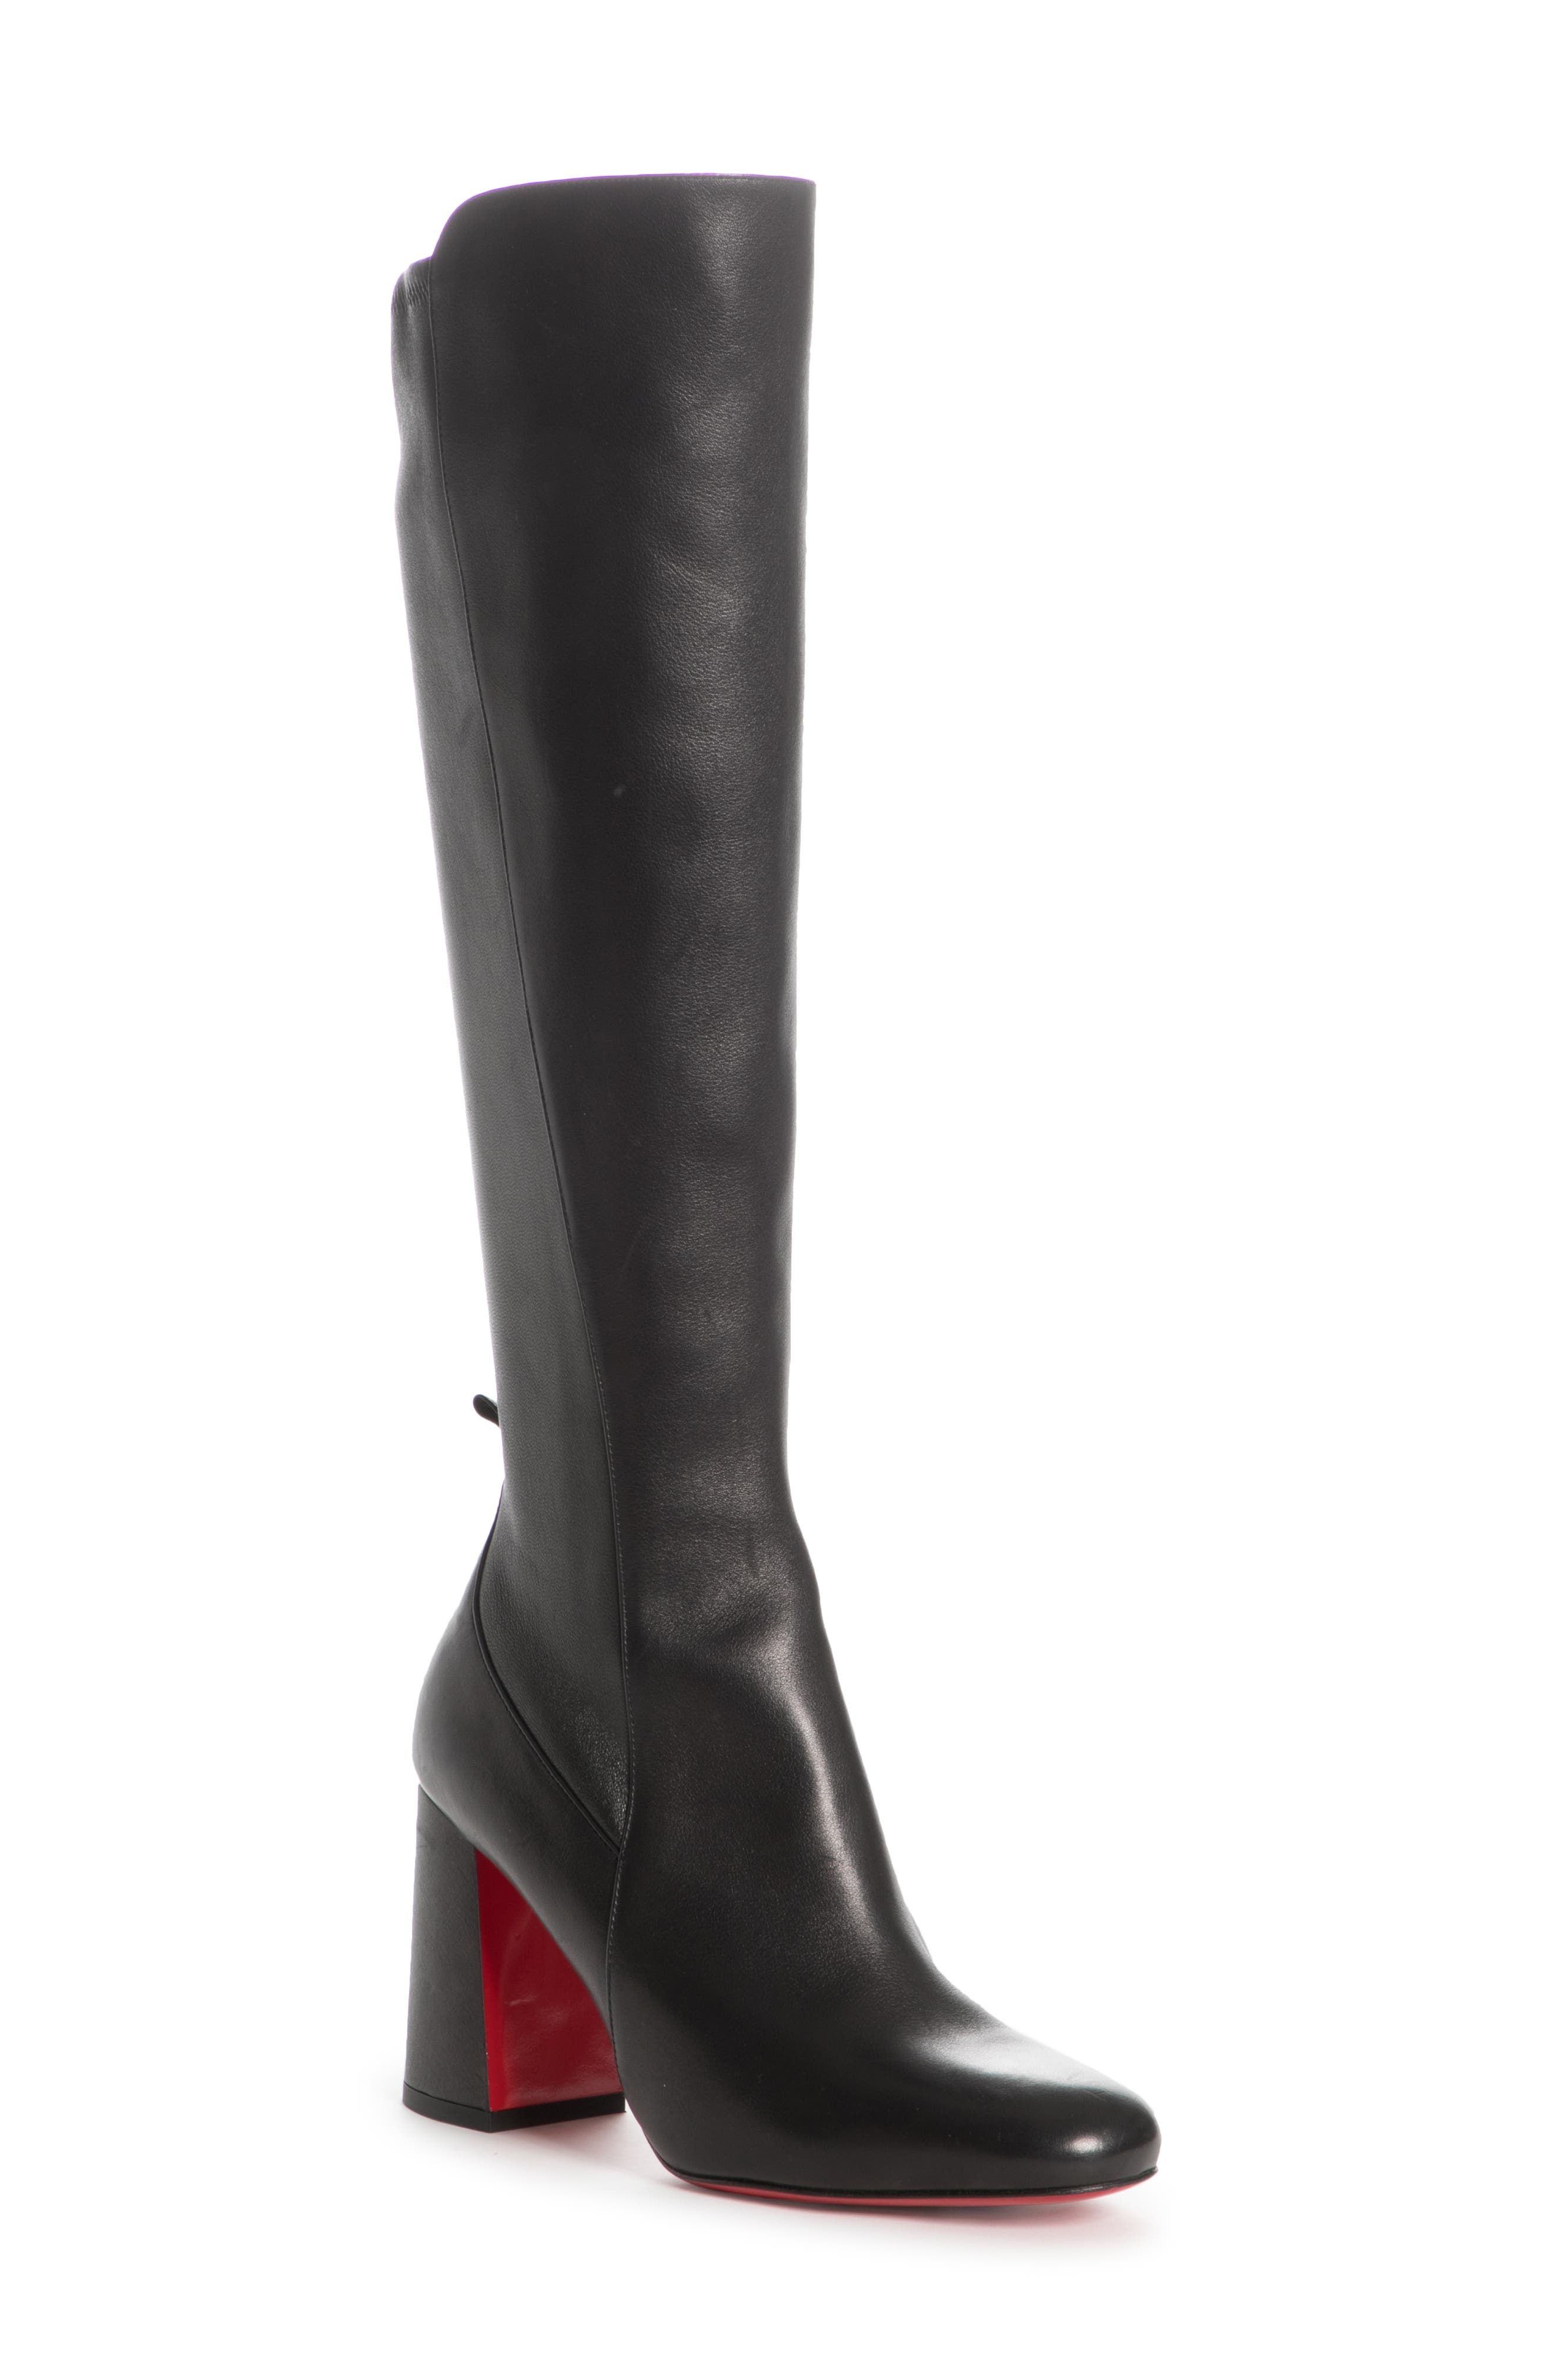 knee high louboutin boots